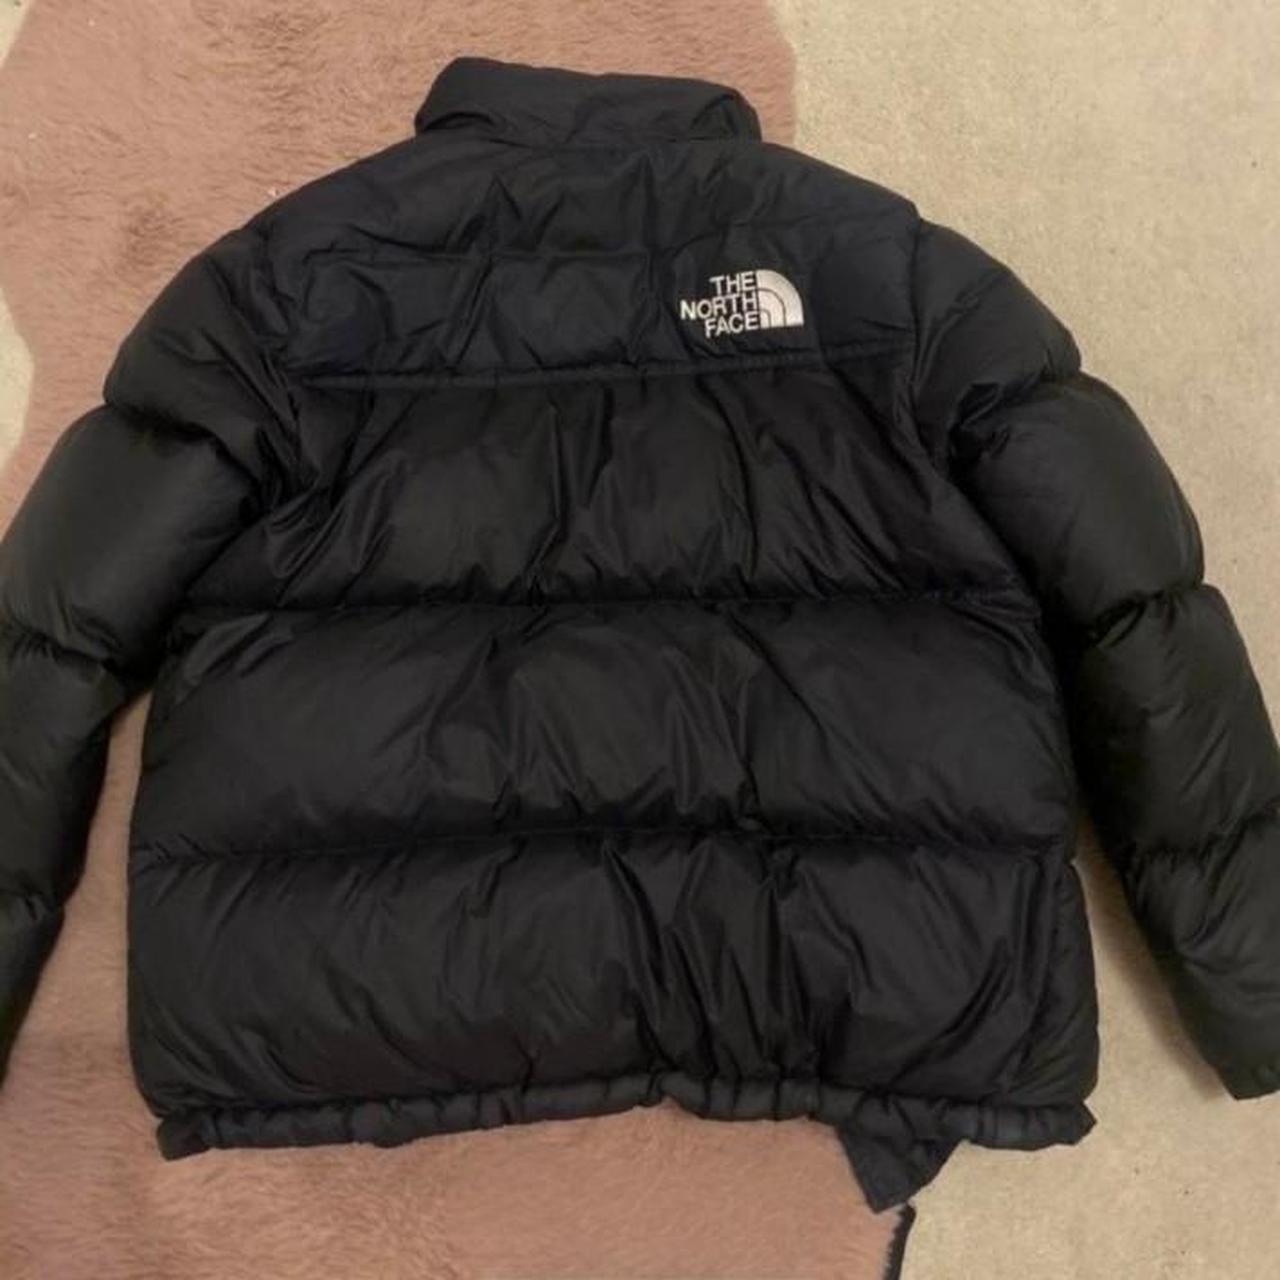 The North Face Puffer Jacket - Depop